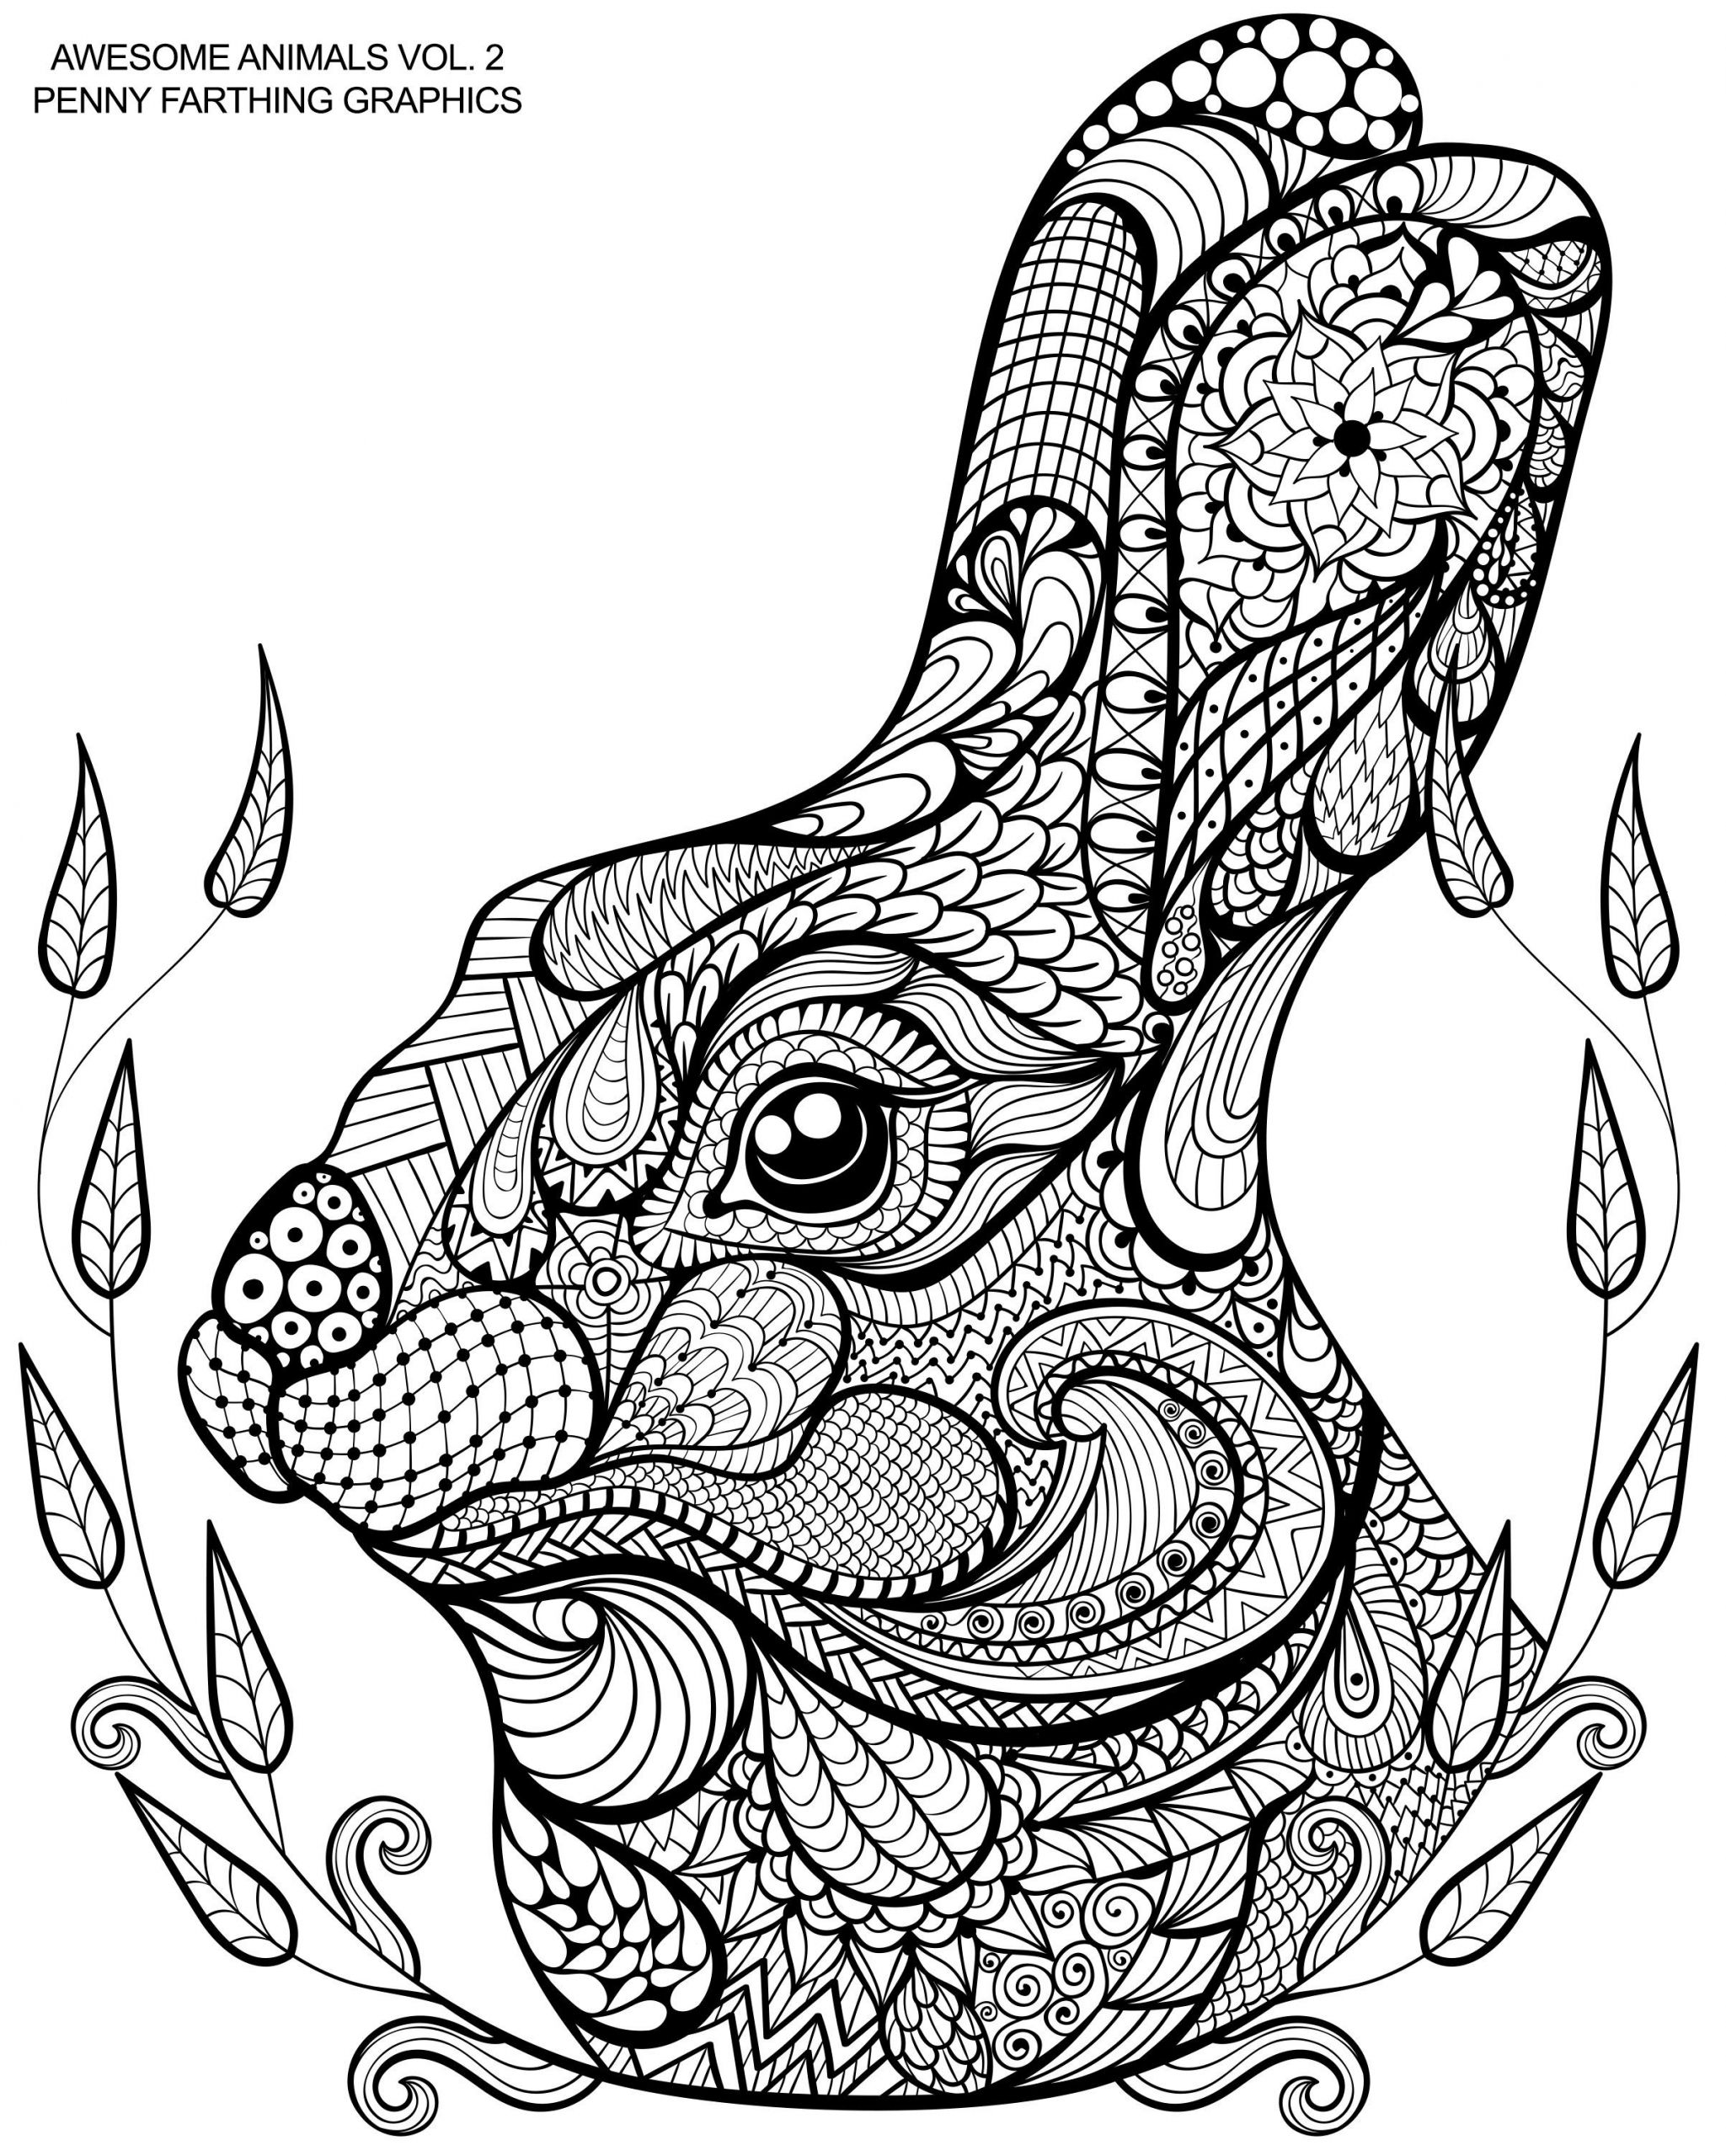 Cute Animal Coloring Pages For Adults
 Cute bunny from “Awesome Animals Vol 2"